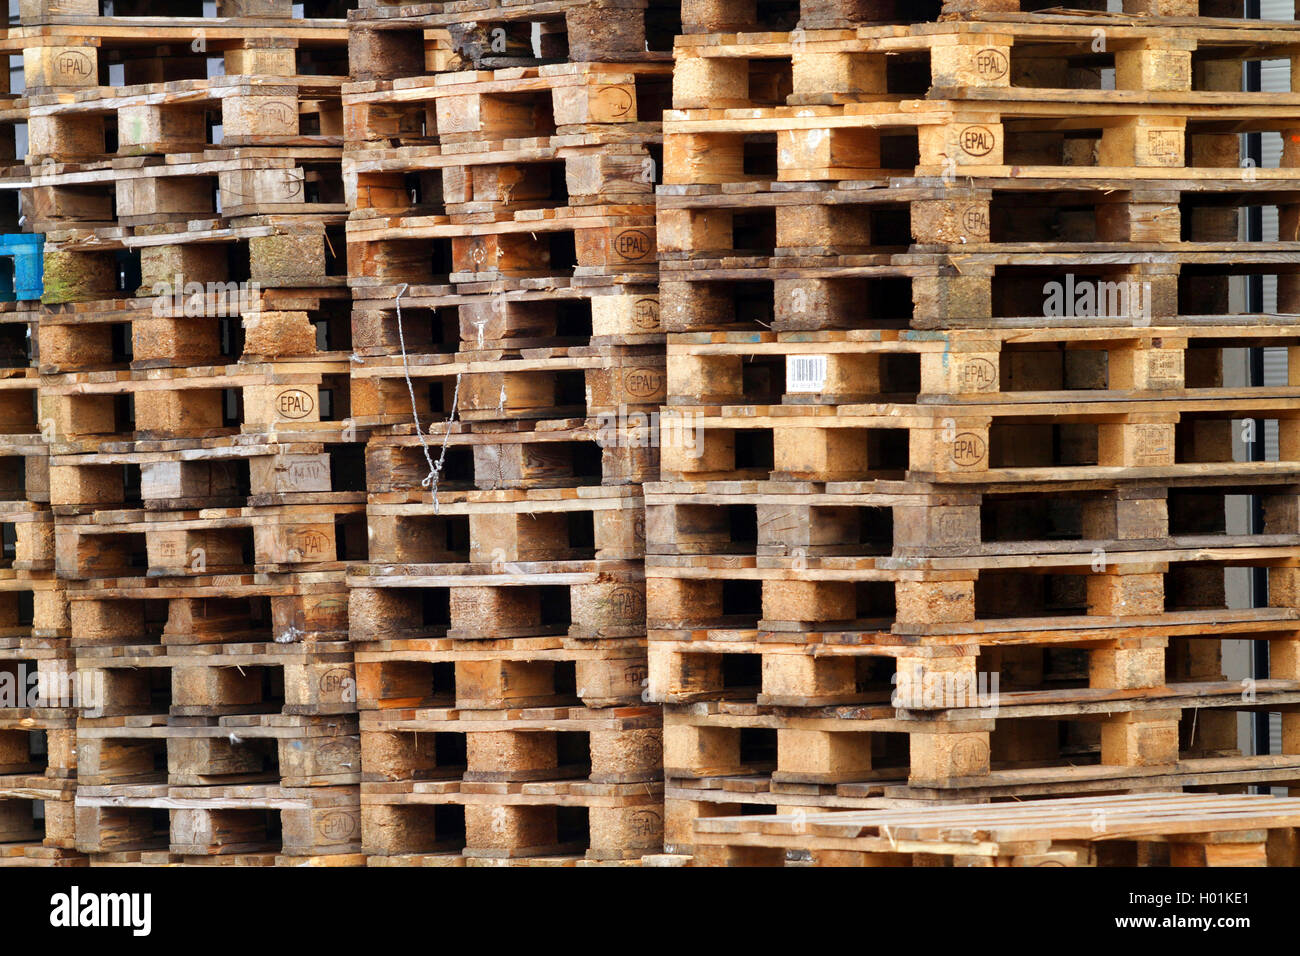 stacks of wooden pallets, Germany Stock Photo